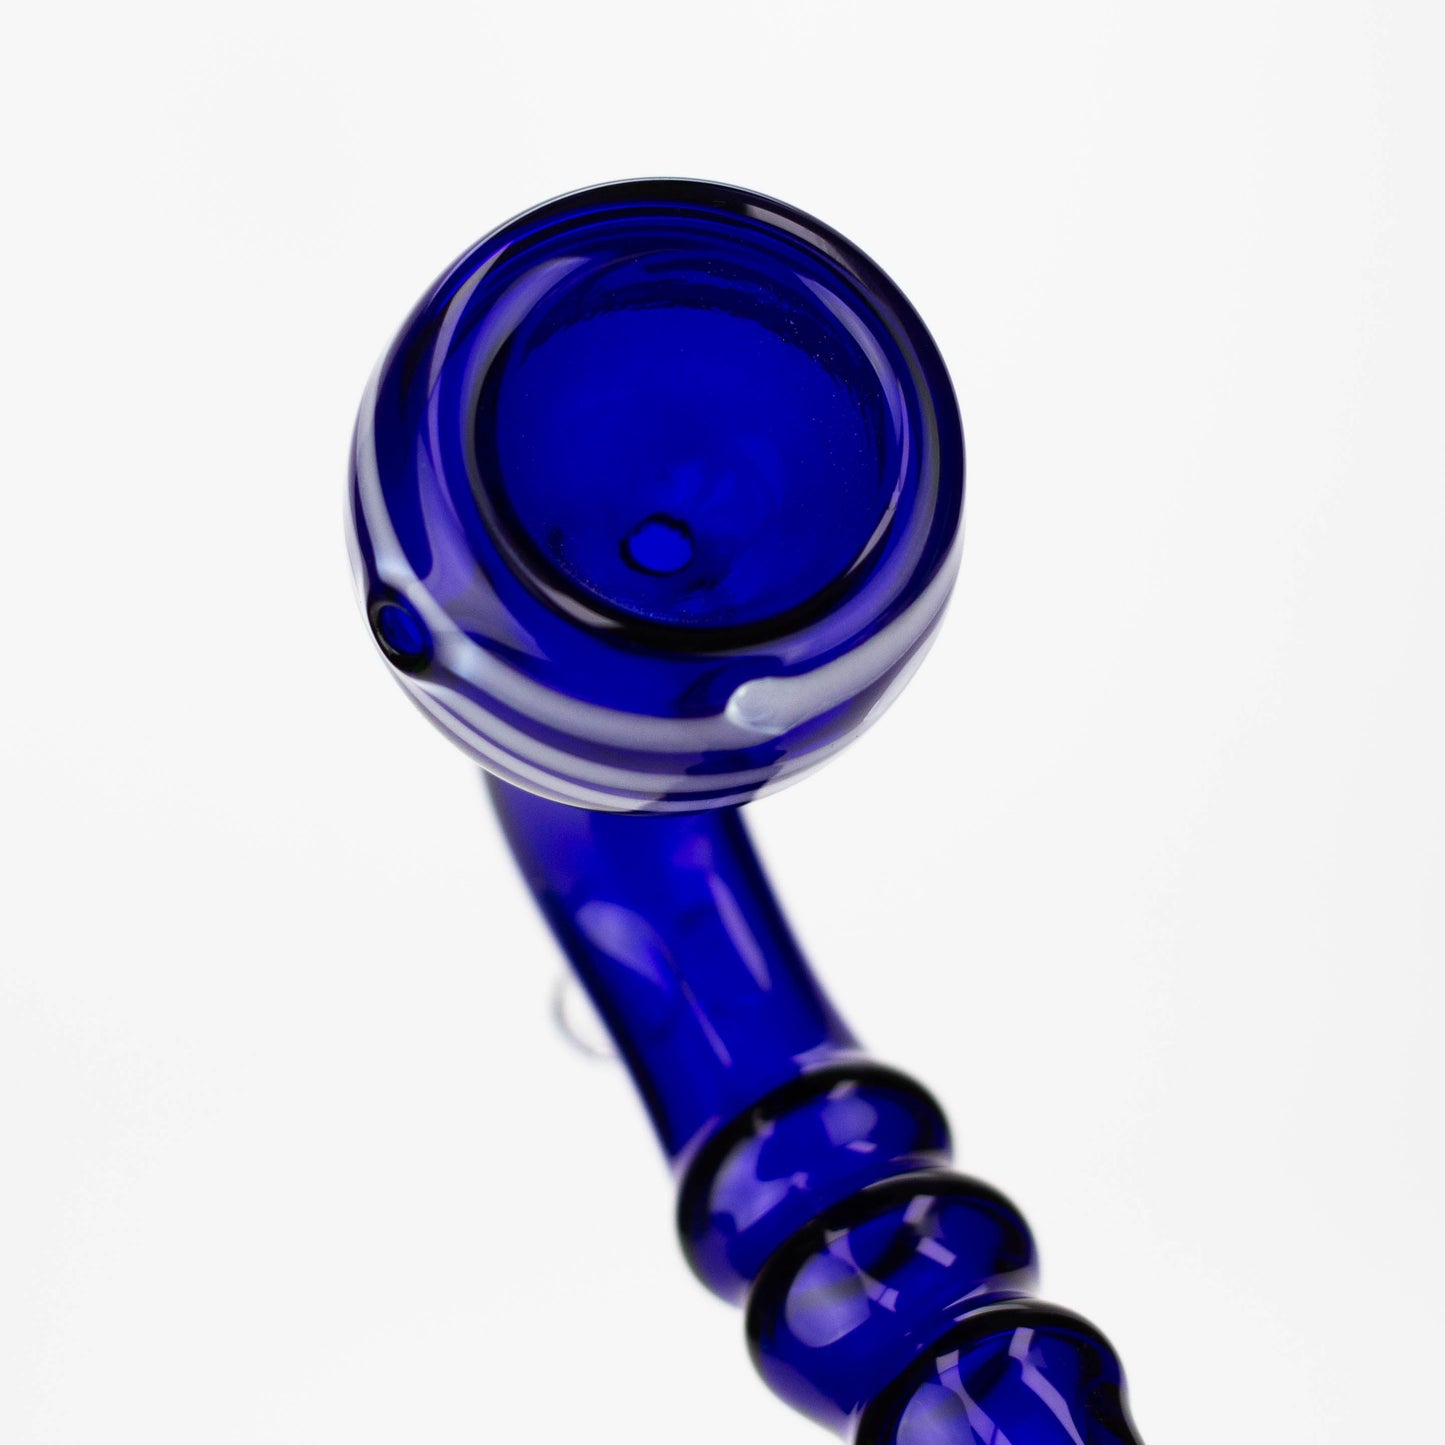 8" Gandalf blue color glass hand pipe pack of 2_1